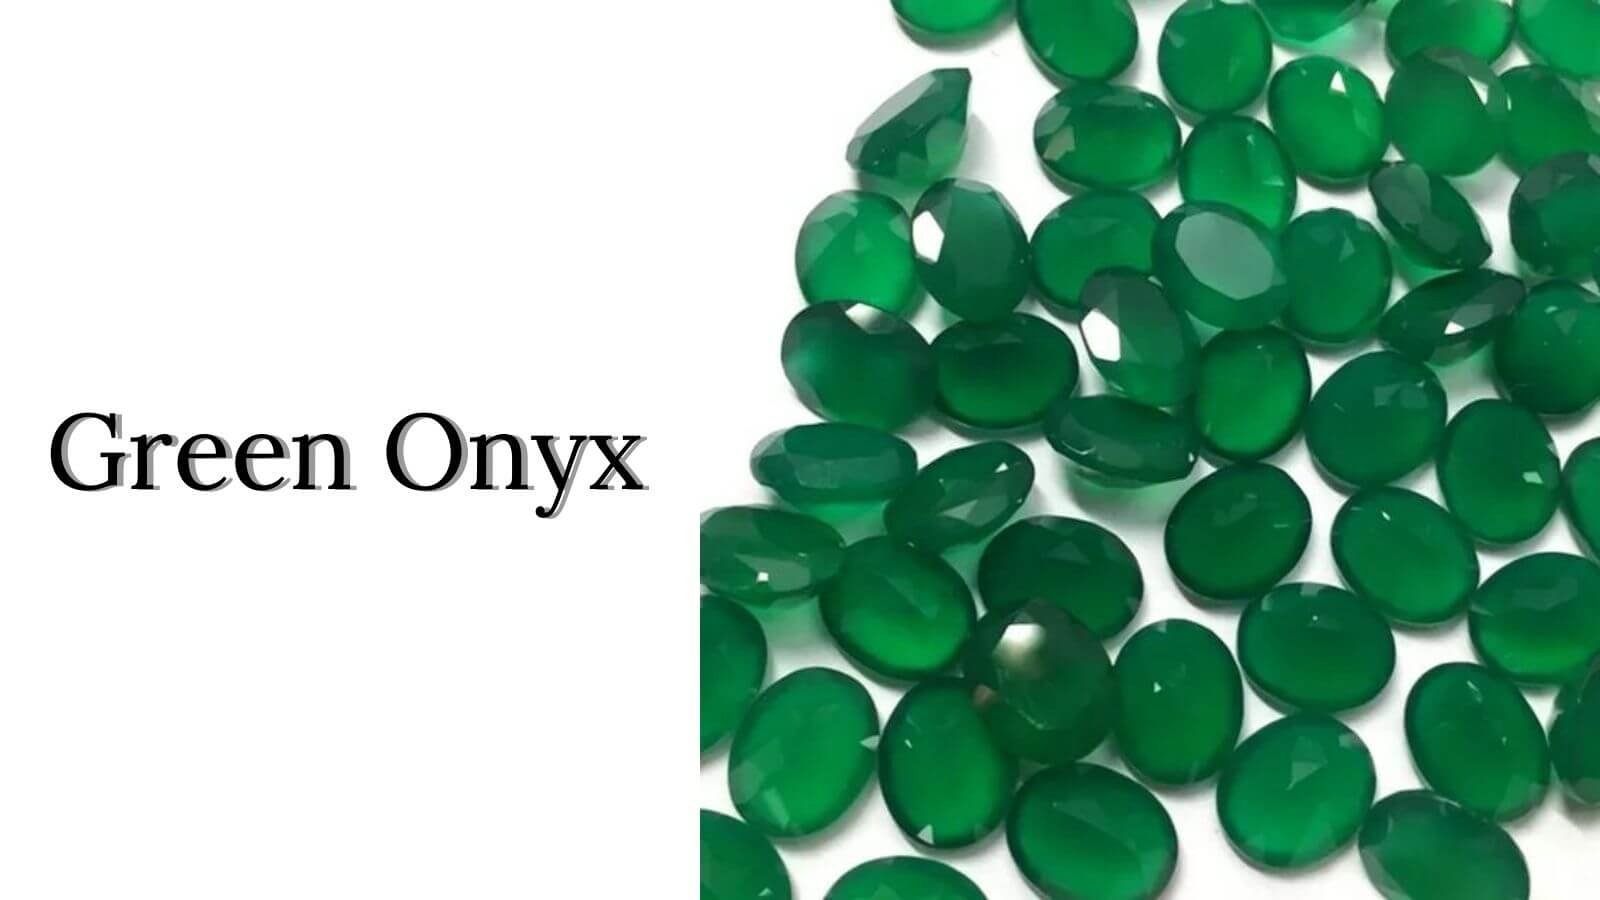 Green onyx: Substitute of Emerald